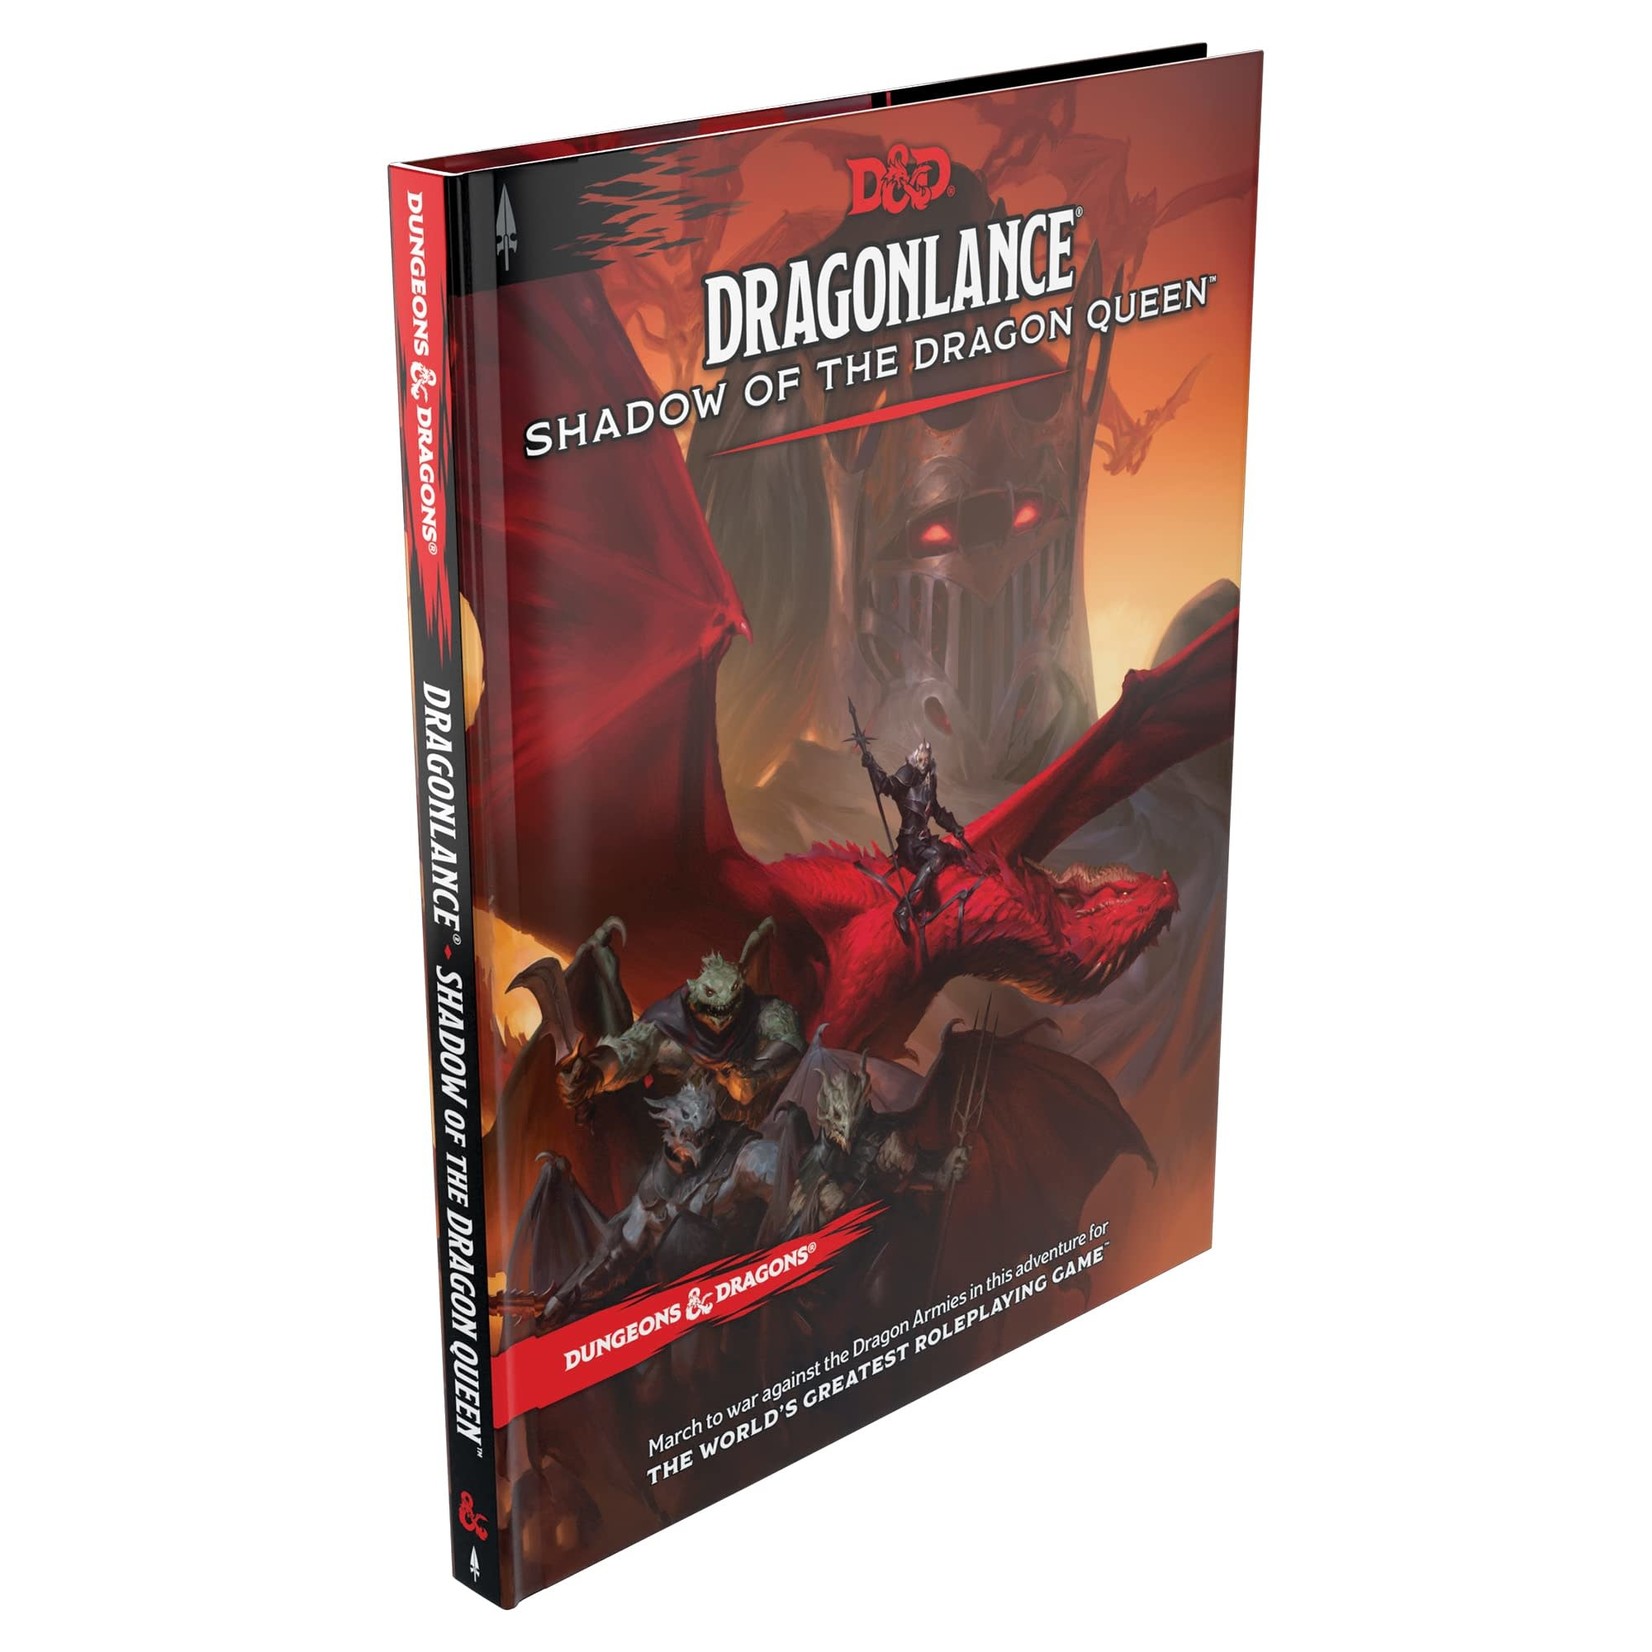 Dungeons & Dragons Dungeons & Dragons – Dragonlance: Shadow of the Dragon Queen (5th Edition, Hardcover)